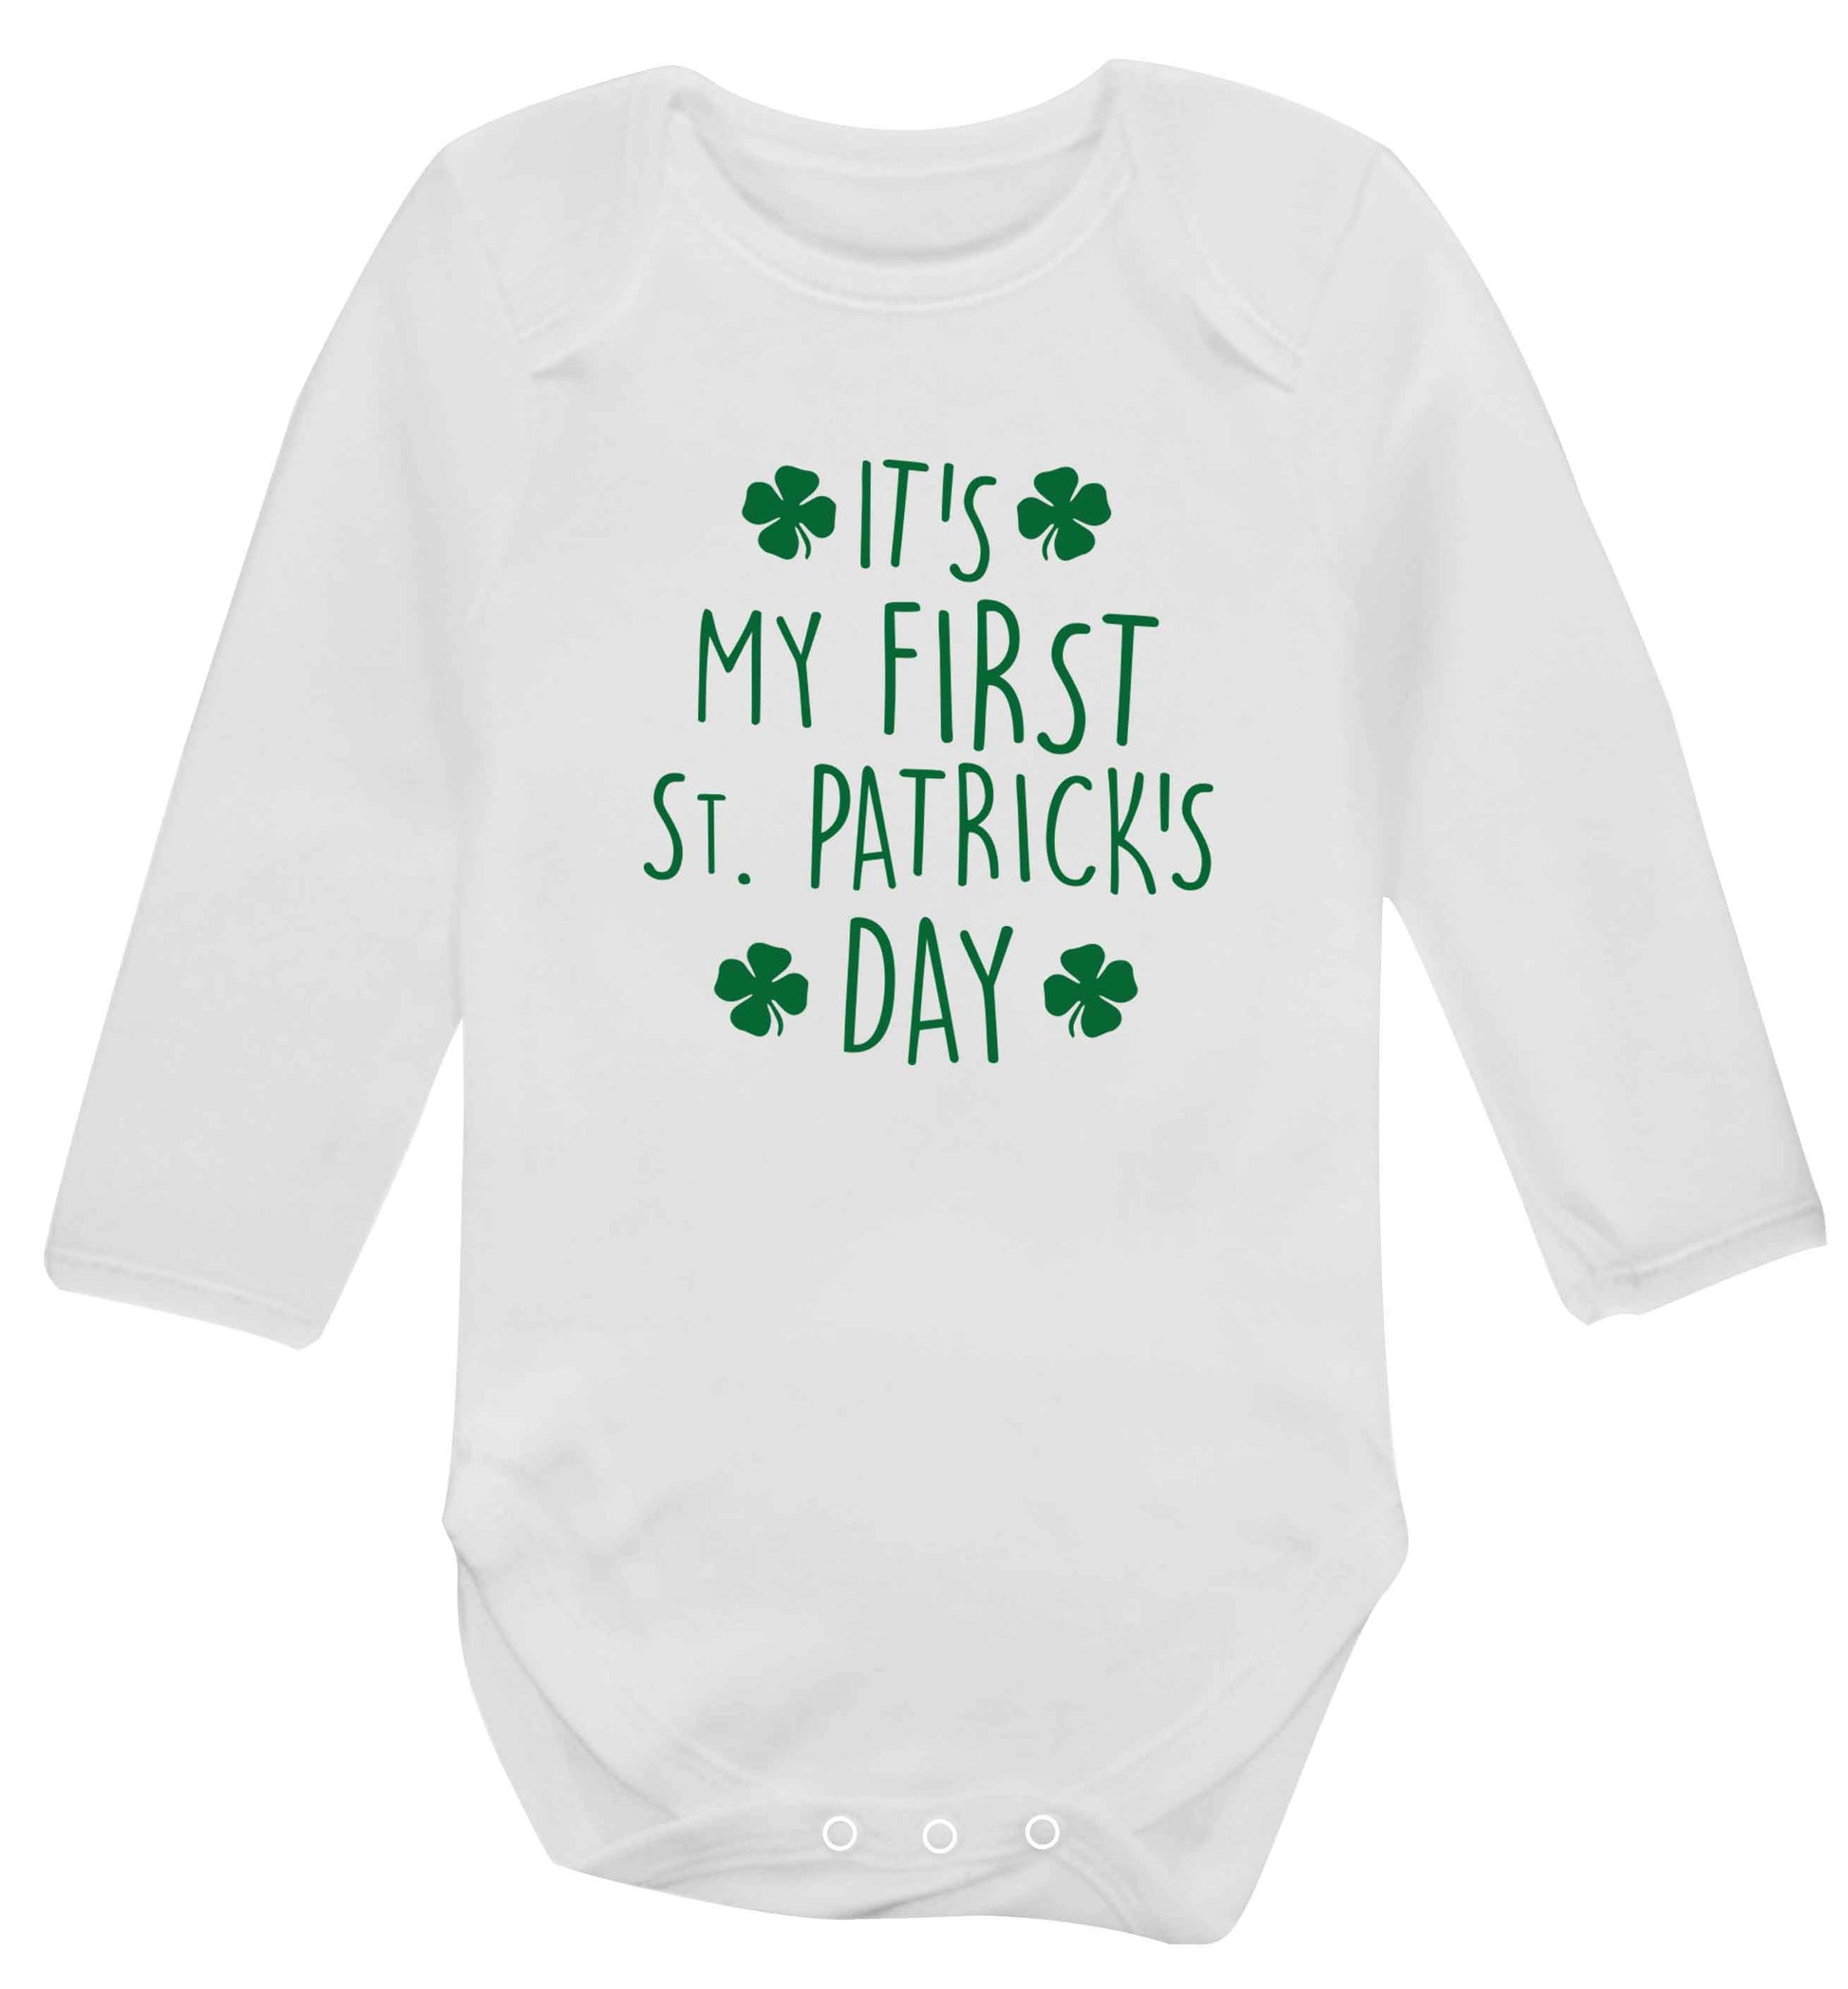 It's my first St.Patrick's day baby vest long sleeved white 6-12 months